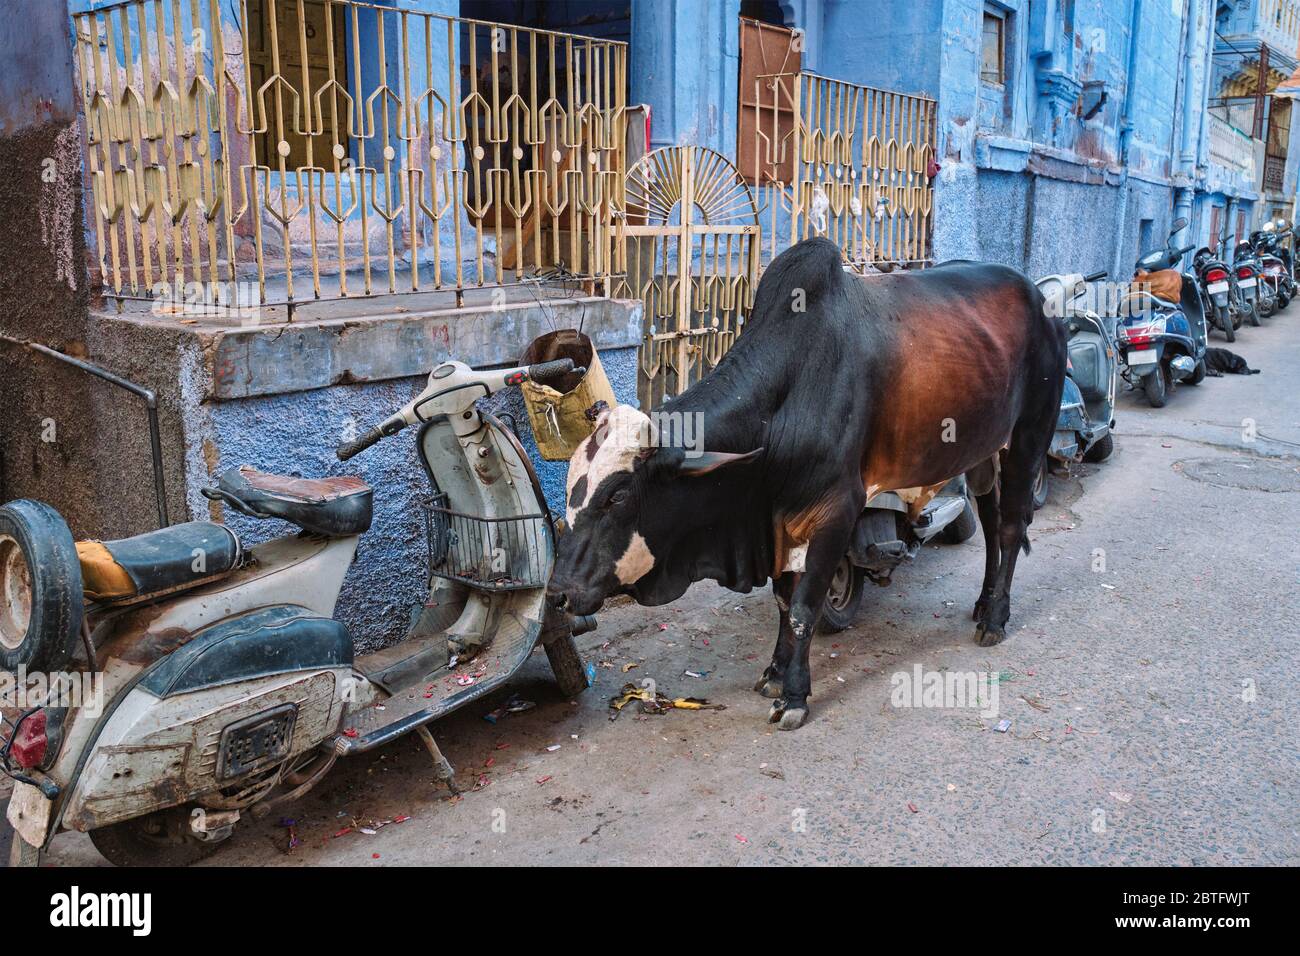 Cow in the street of India Stock Photo